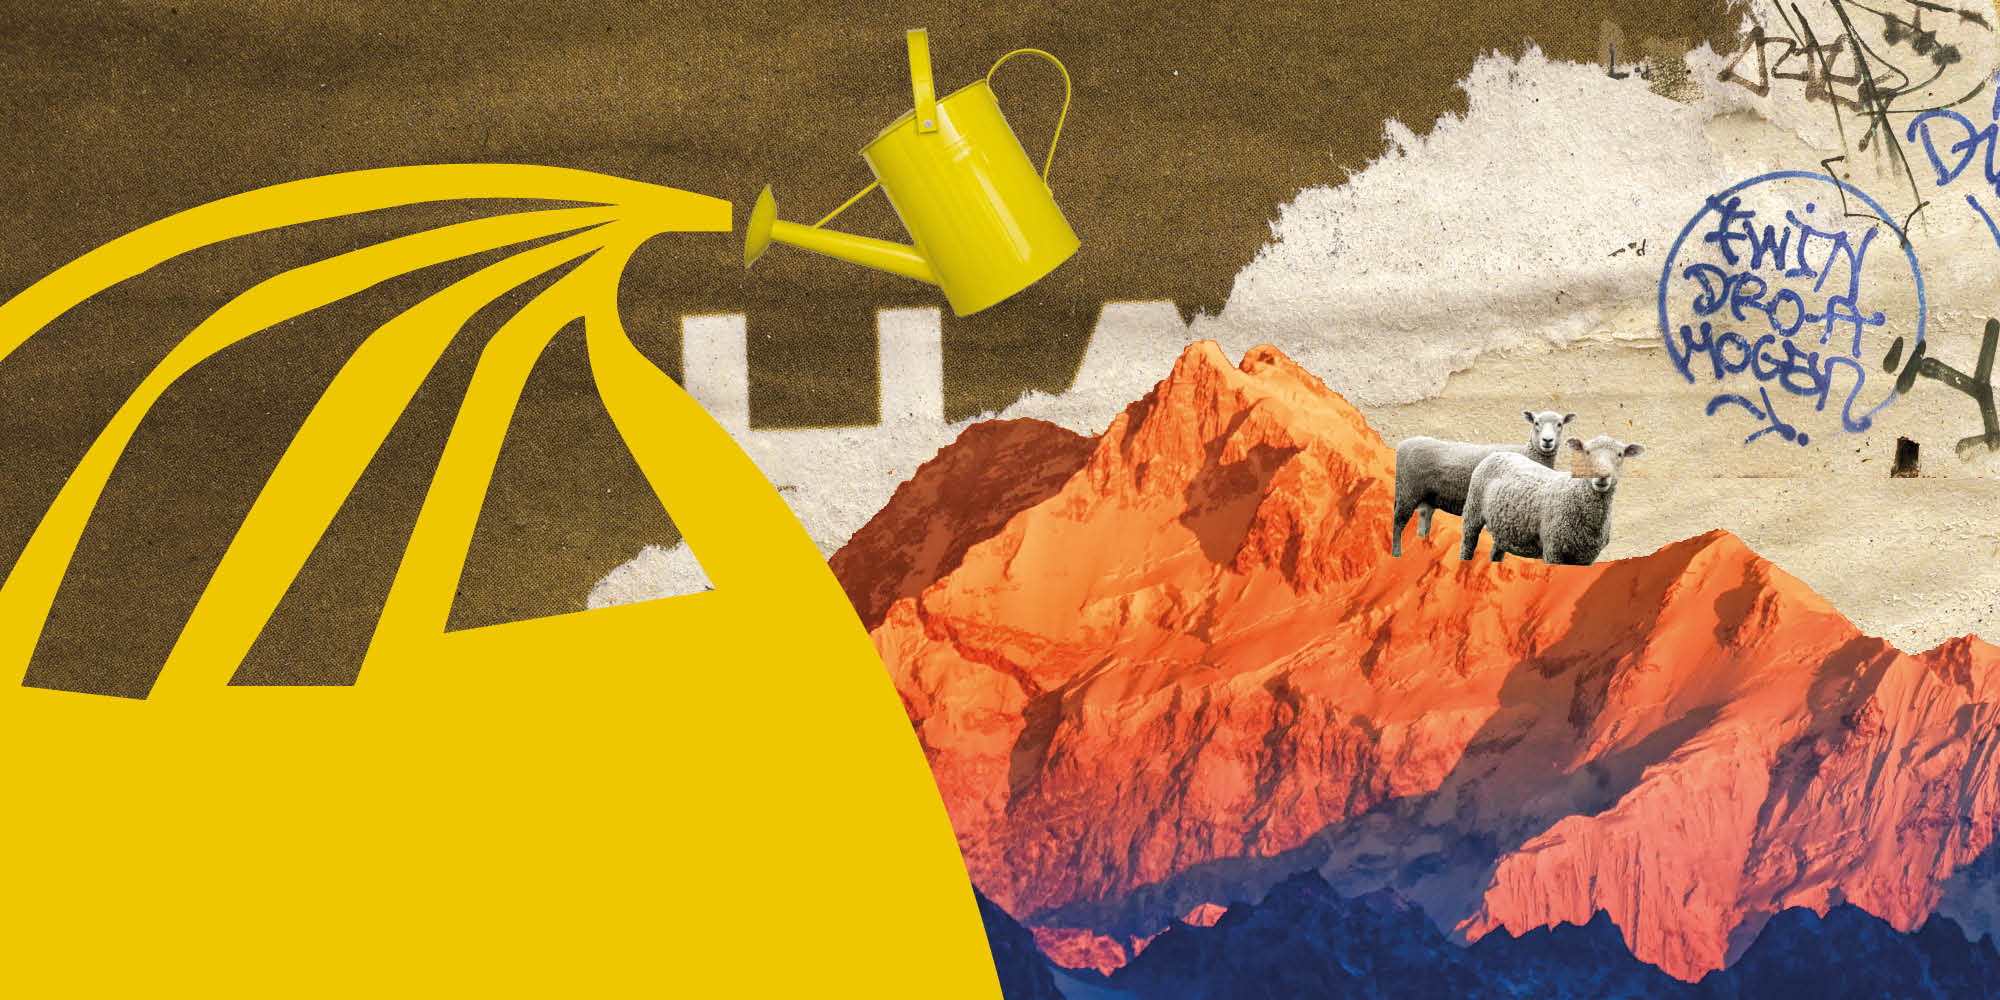 A collage featuring a mountain range and two sheep, and a yellow watering can.